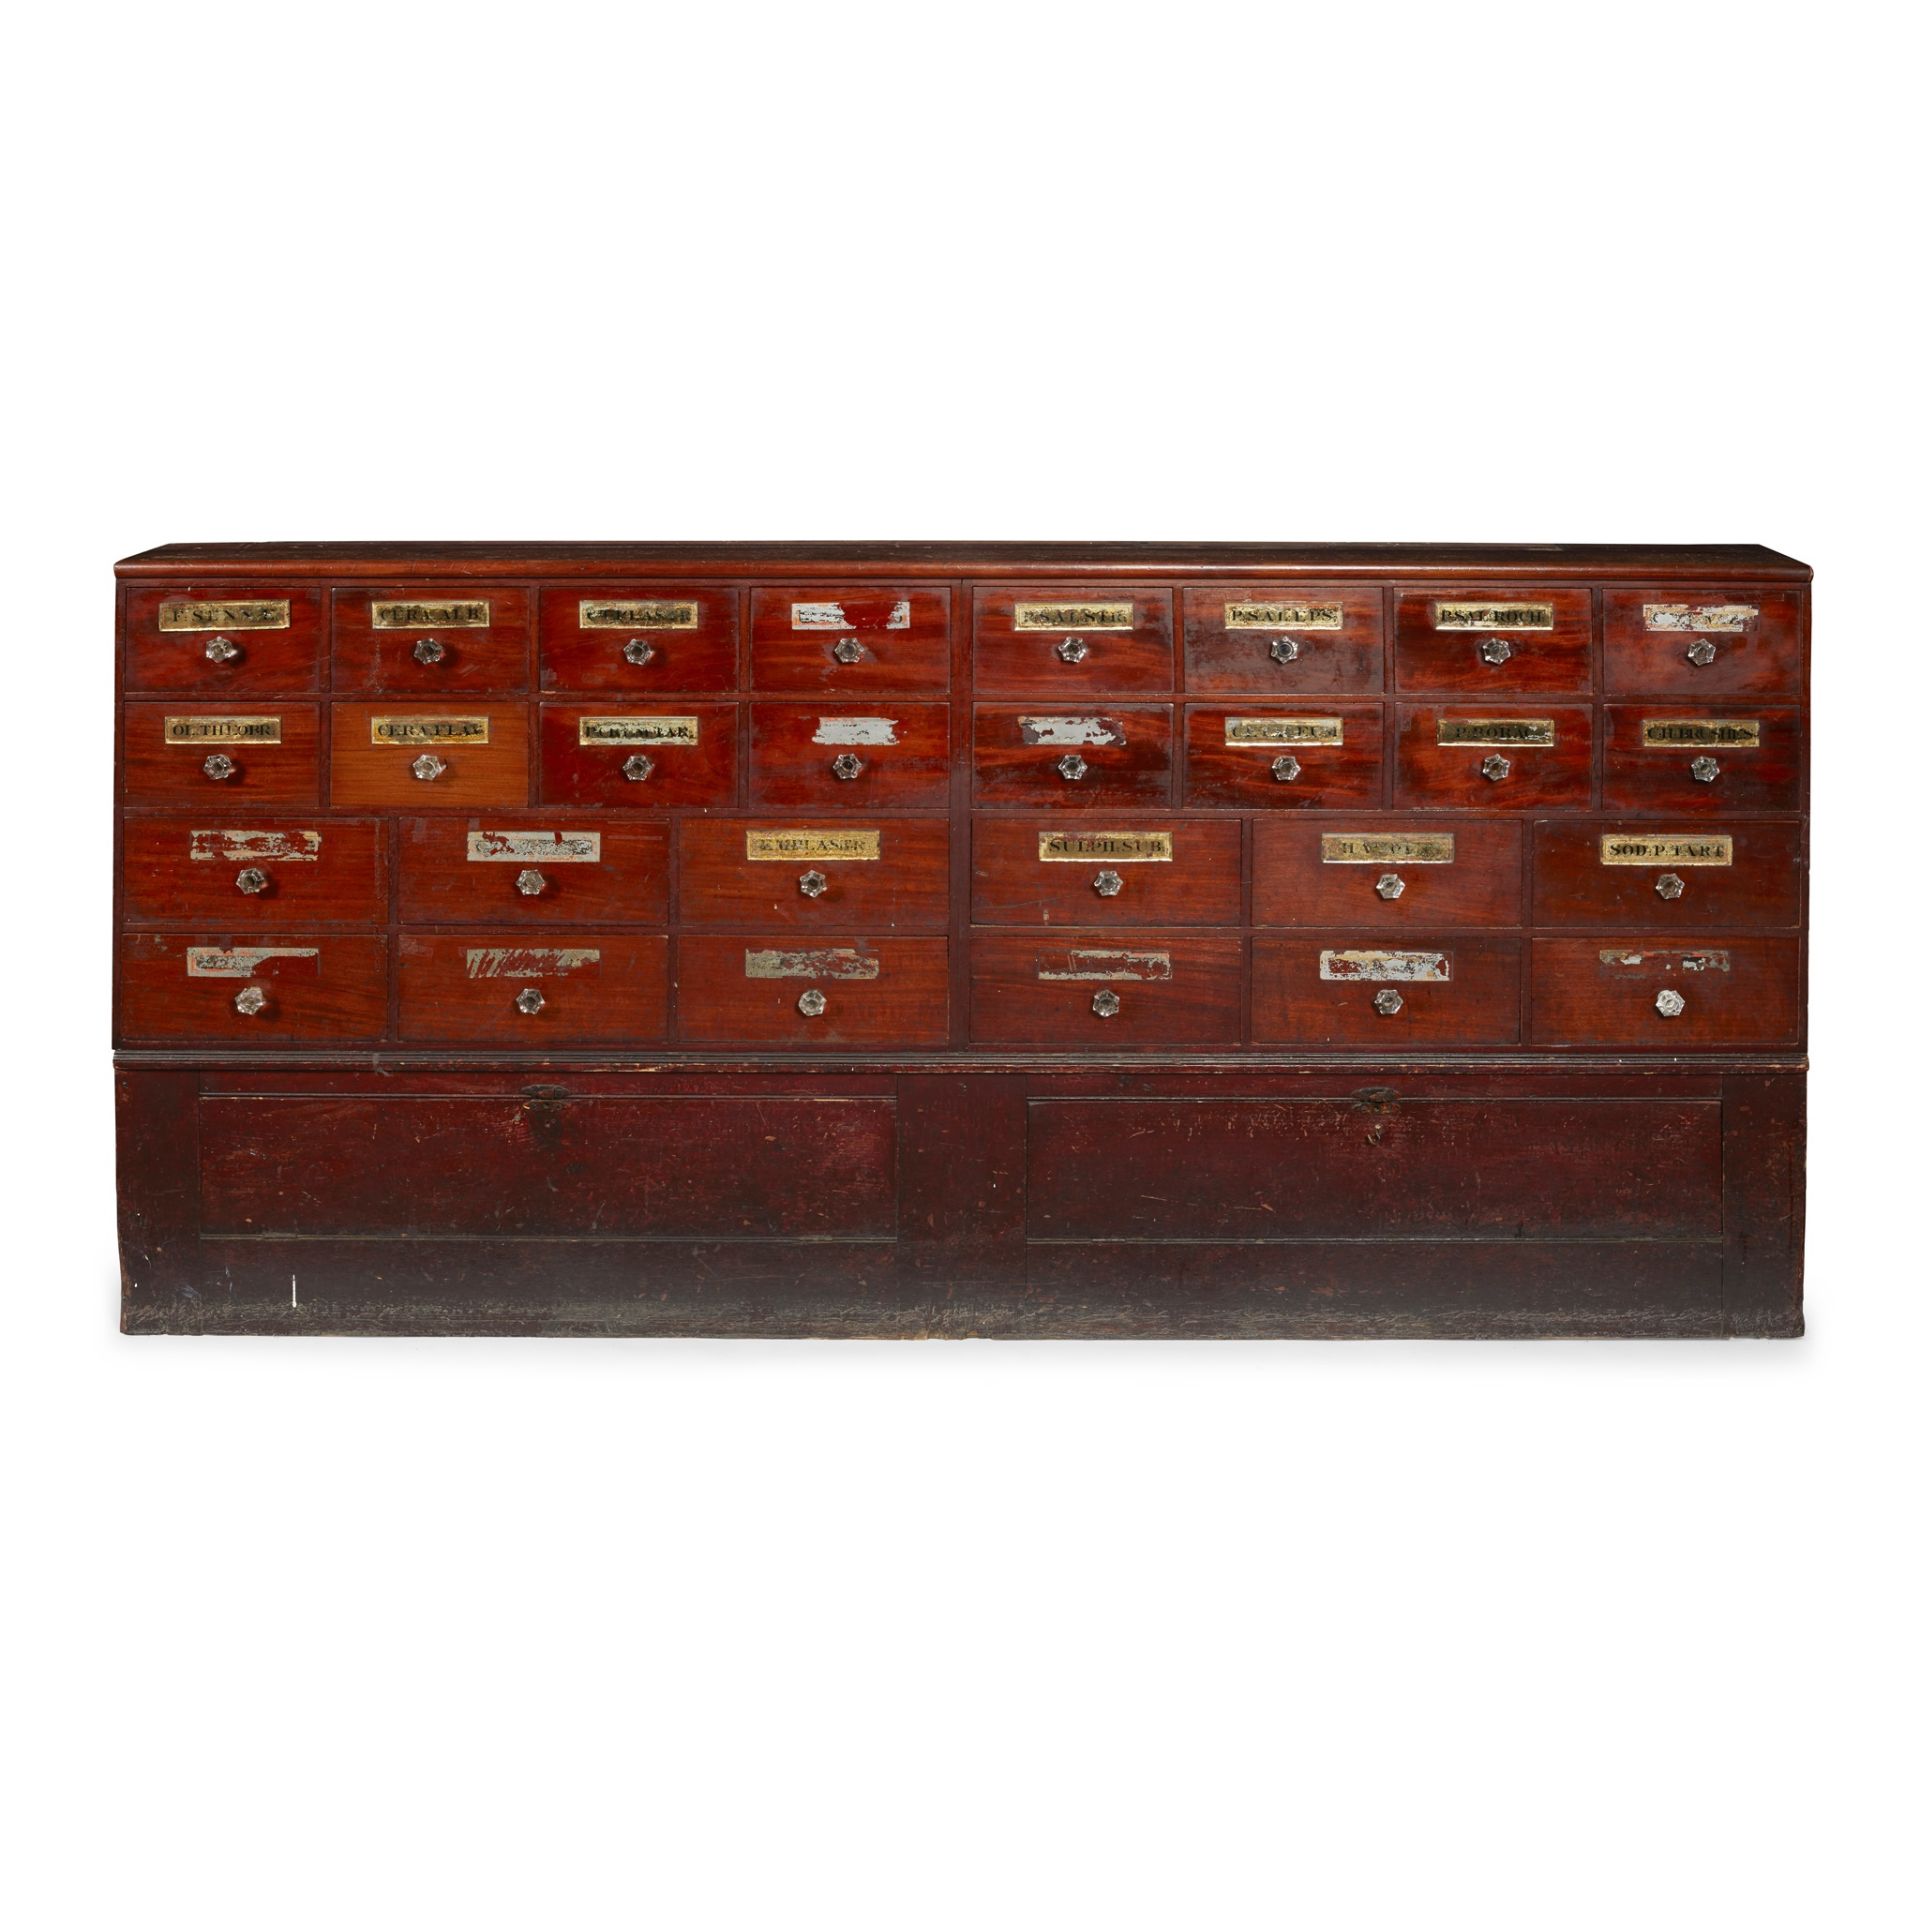 LARGE PINE AND MAHOGANY APOTHECARY'S CABINET LATE 19TH CENTURY